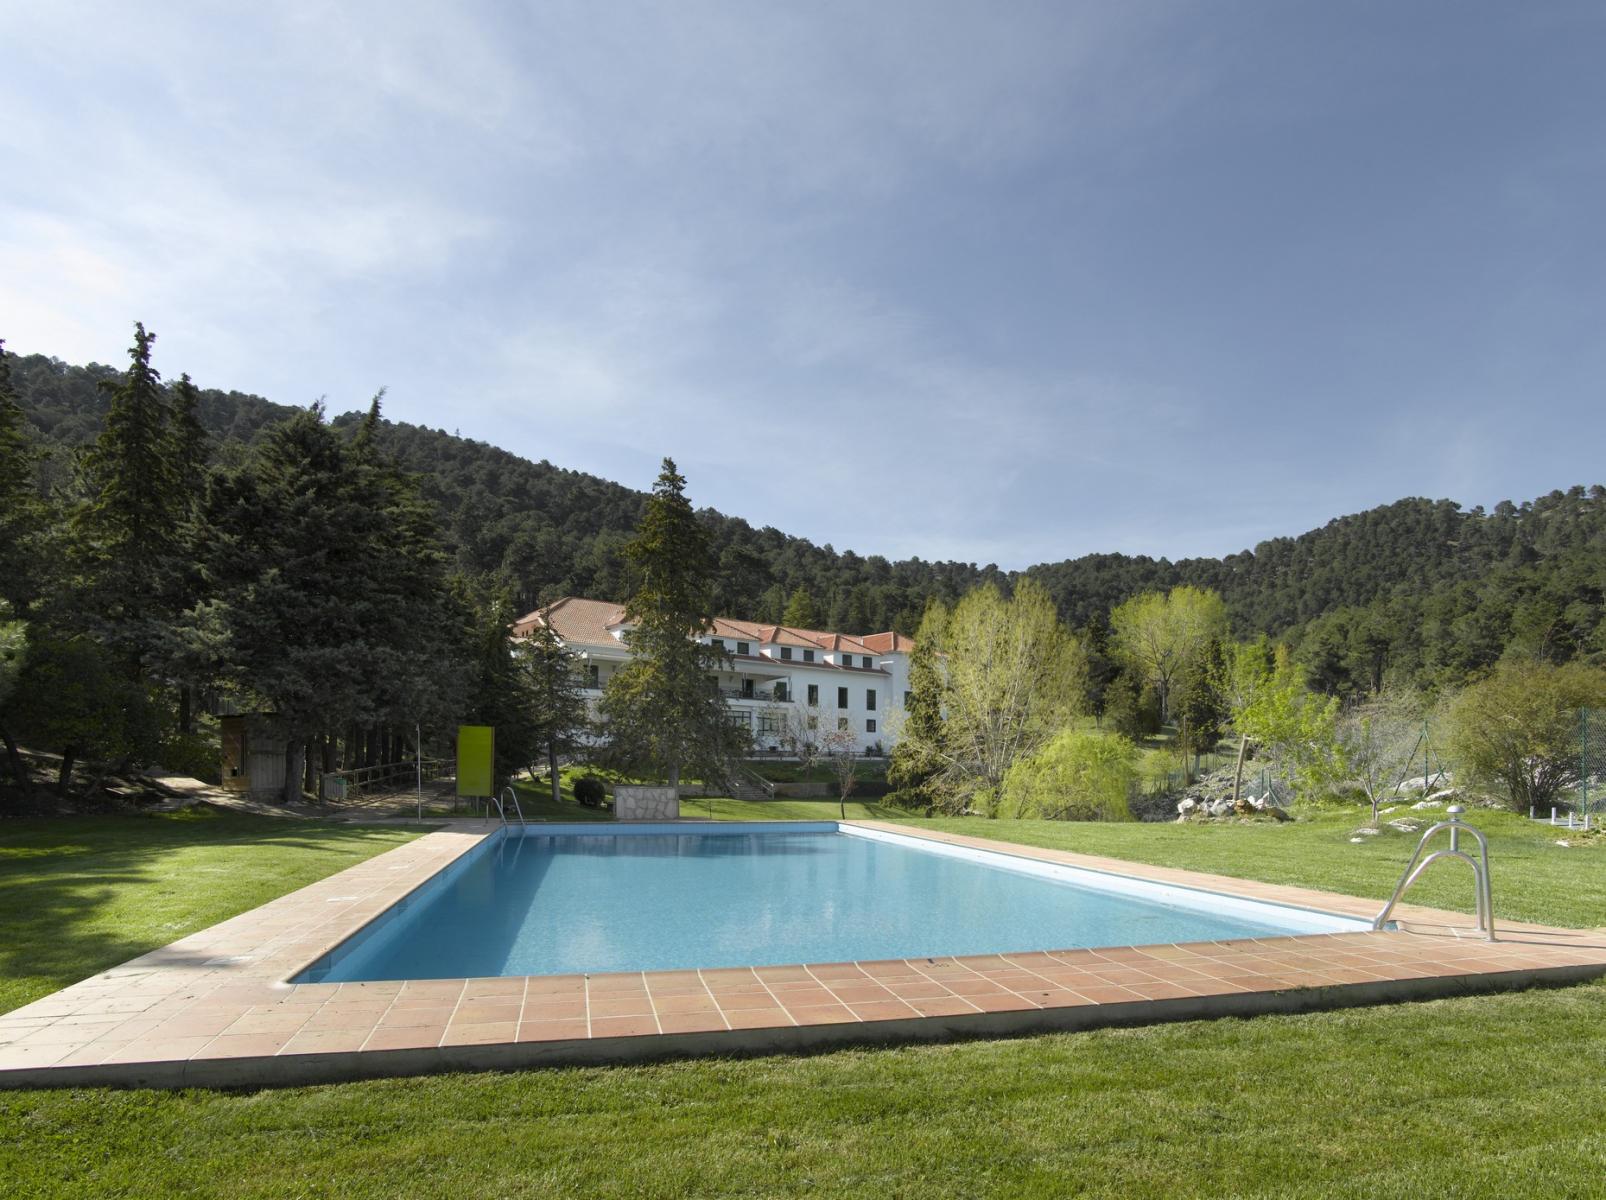 An Andalusian farmhouse in the heart of the mountains